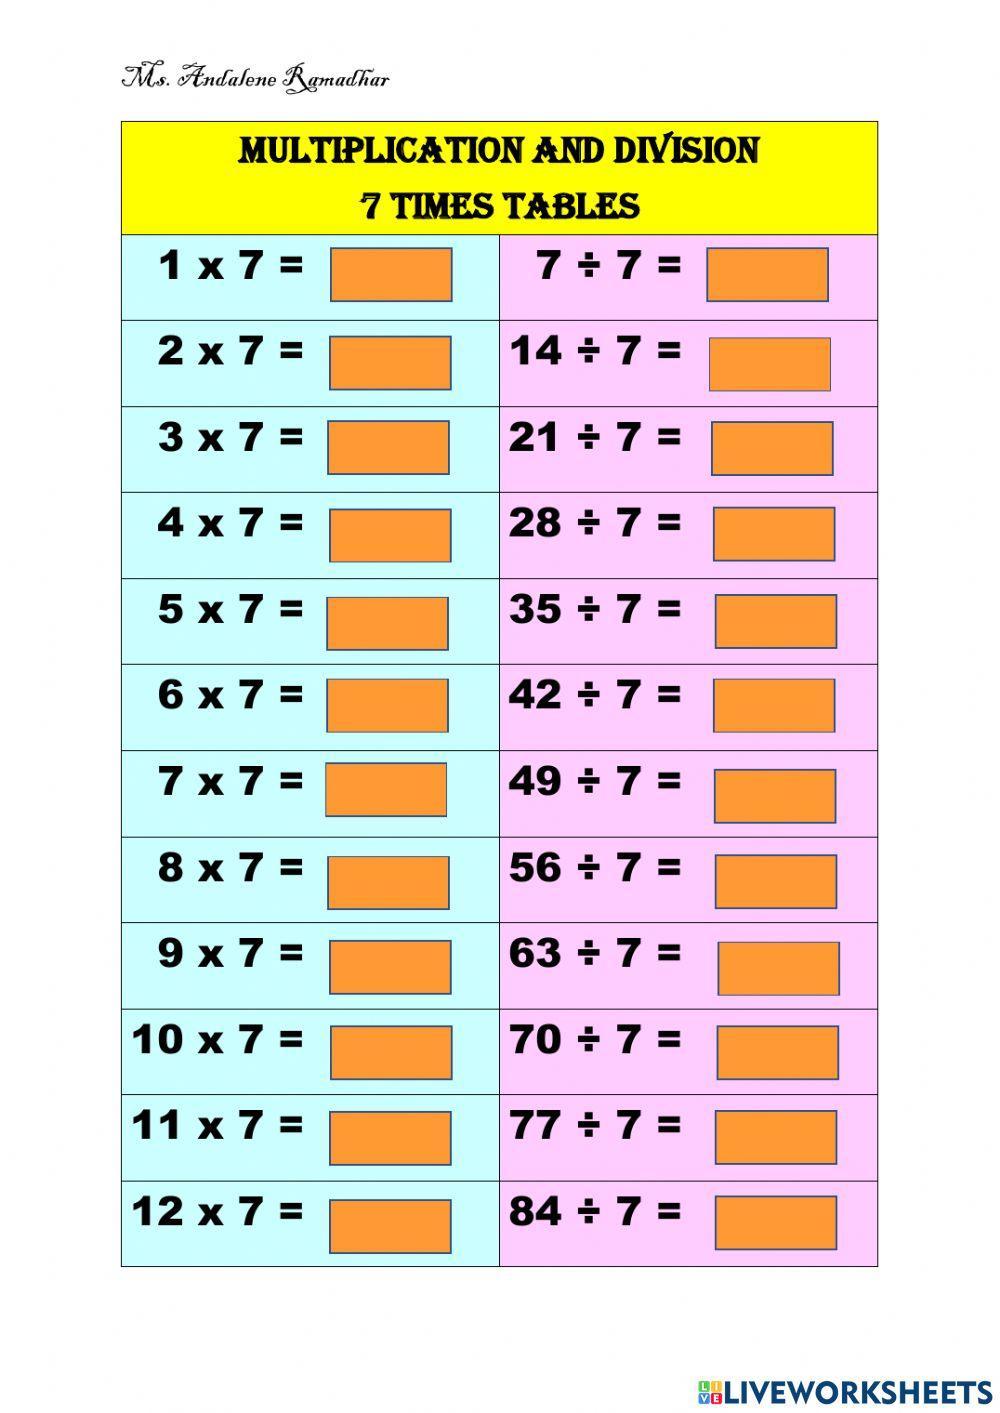 Multiplication and division 7 times tables